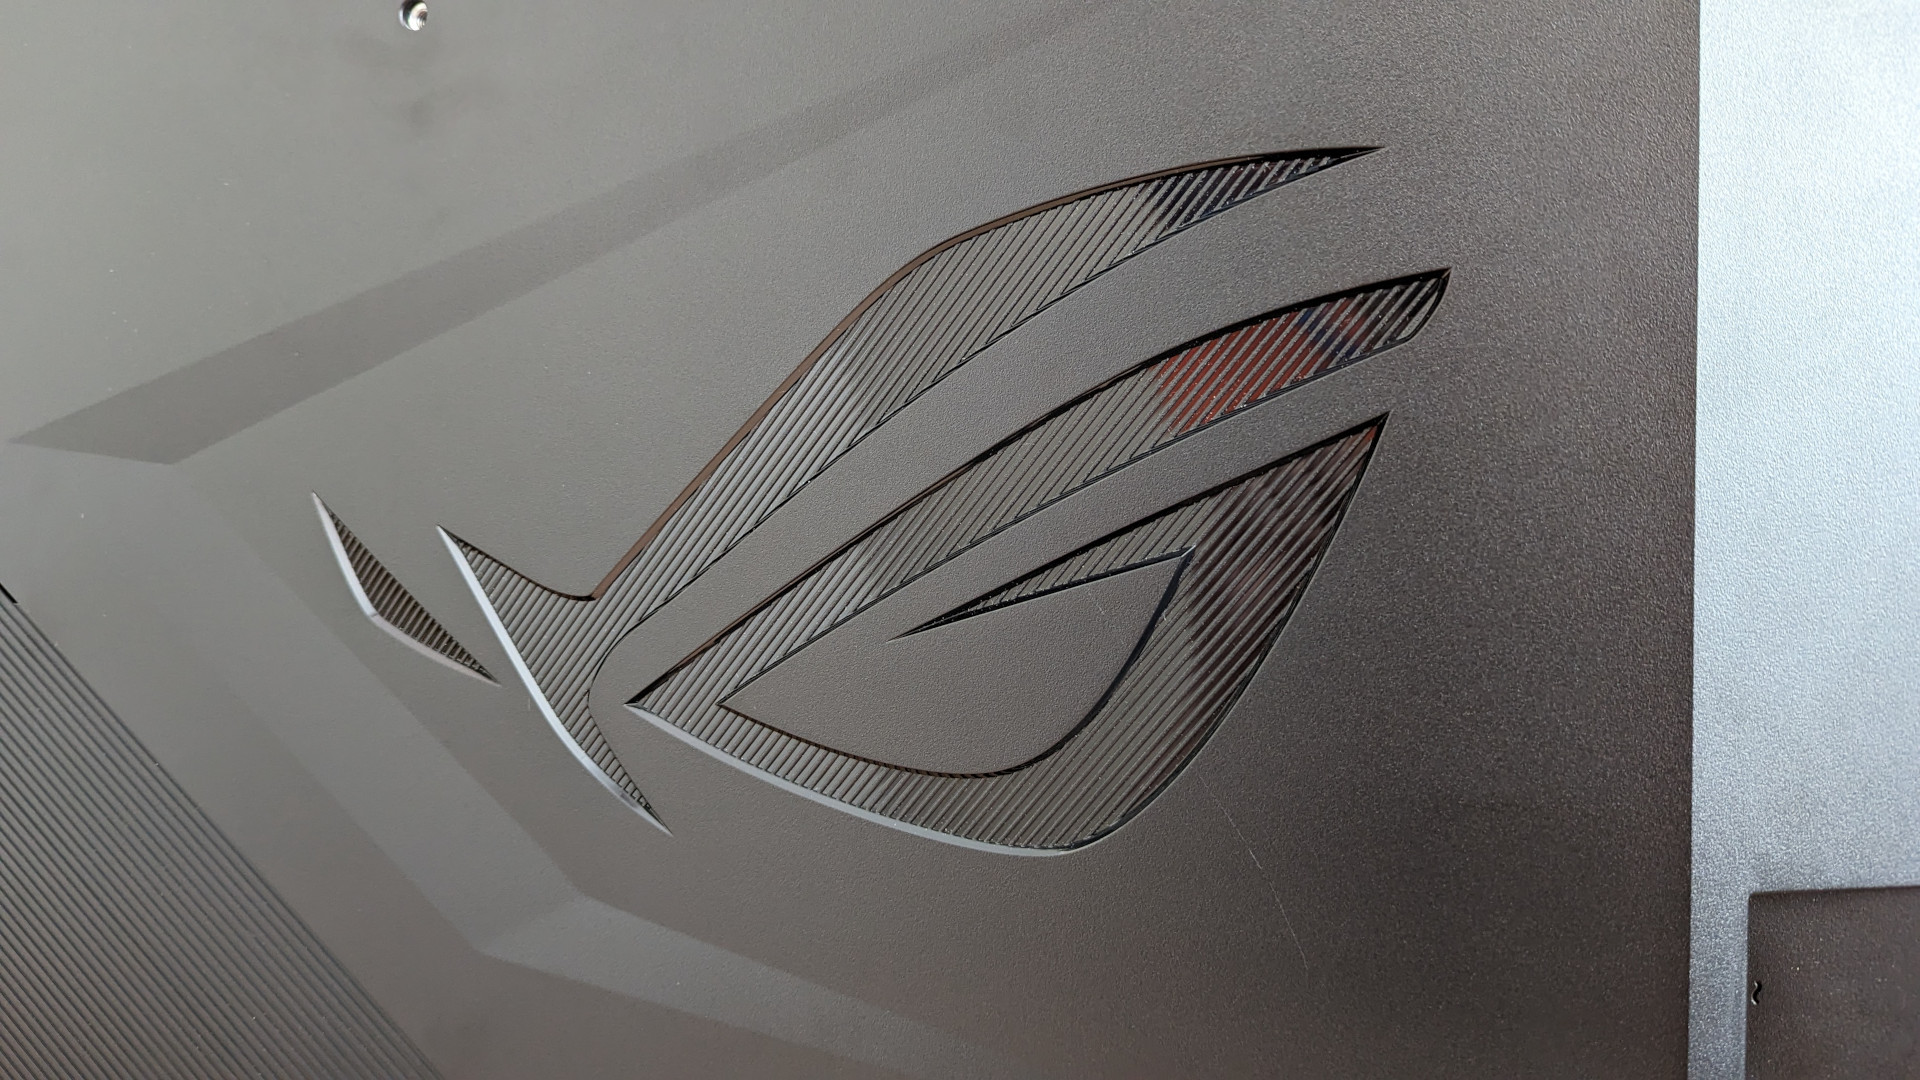 A close up of the Asus ROG logo on the back of the Swift PG48UQ gaming monitor